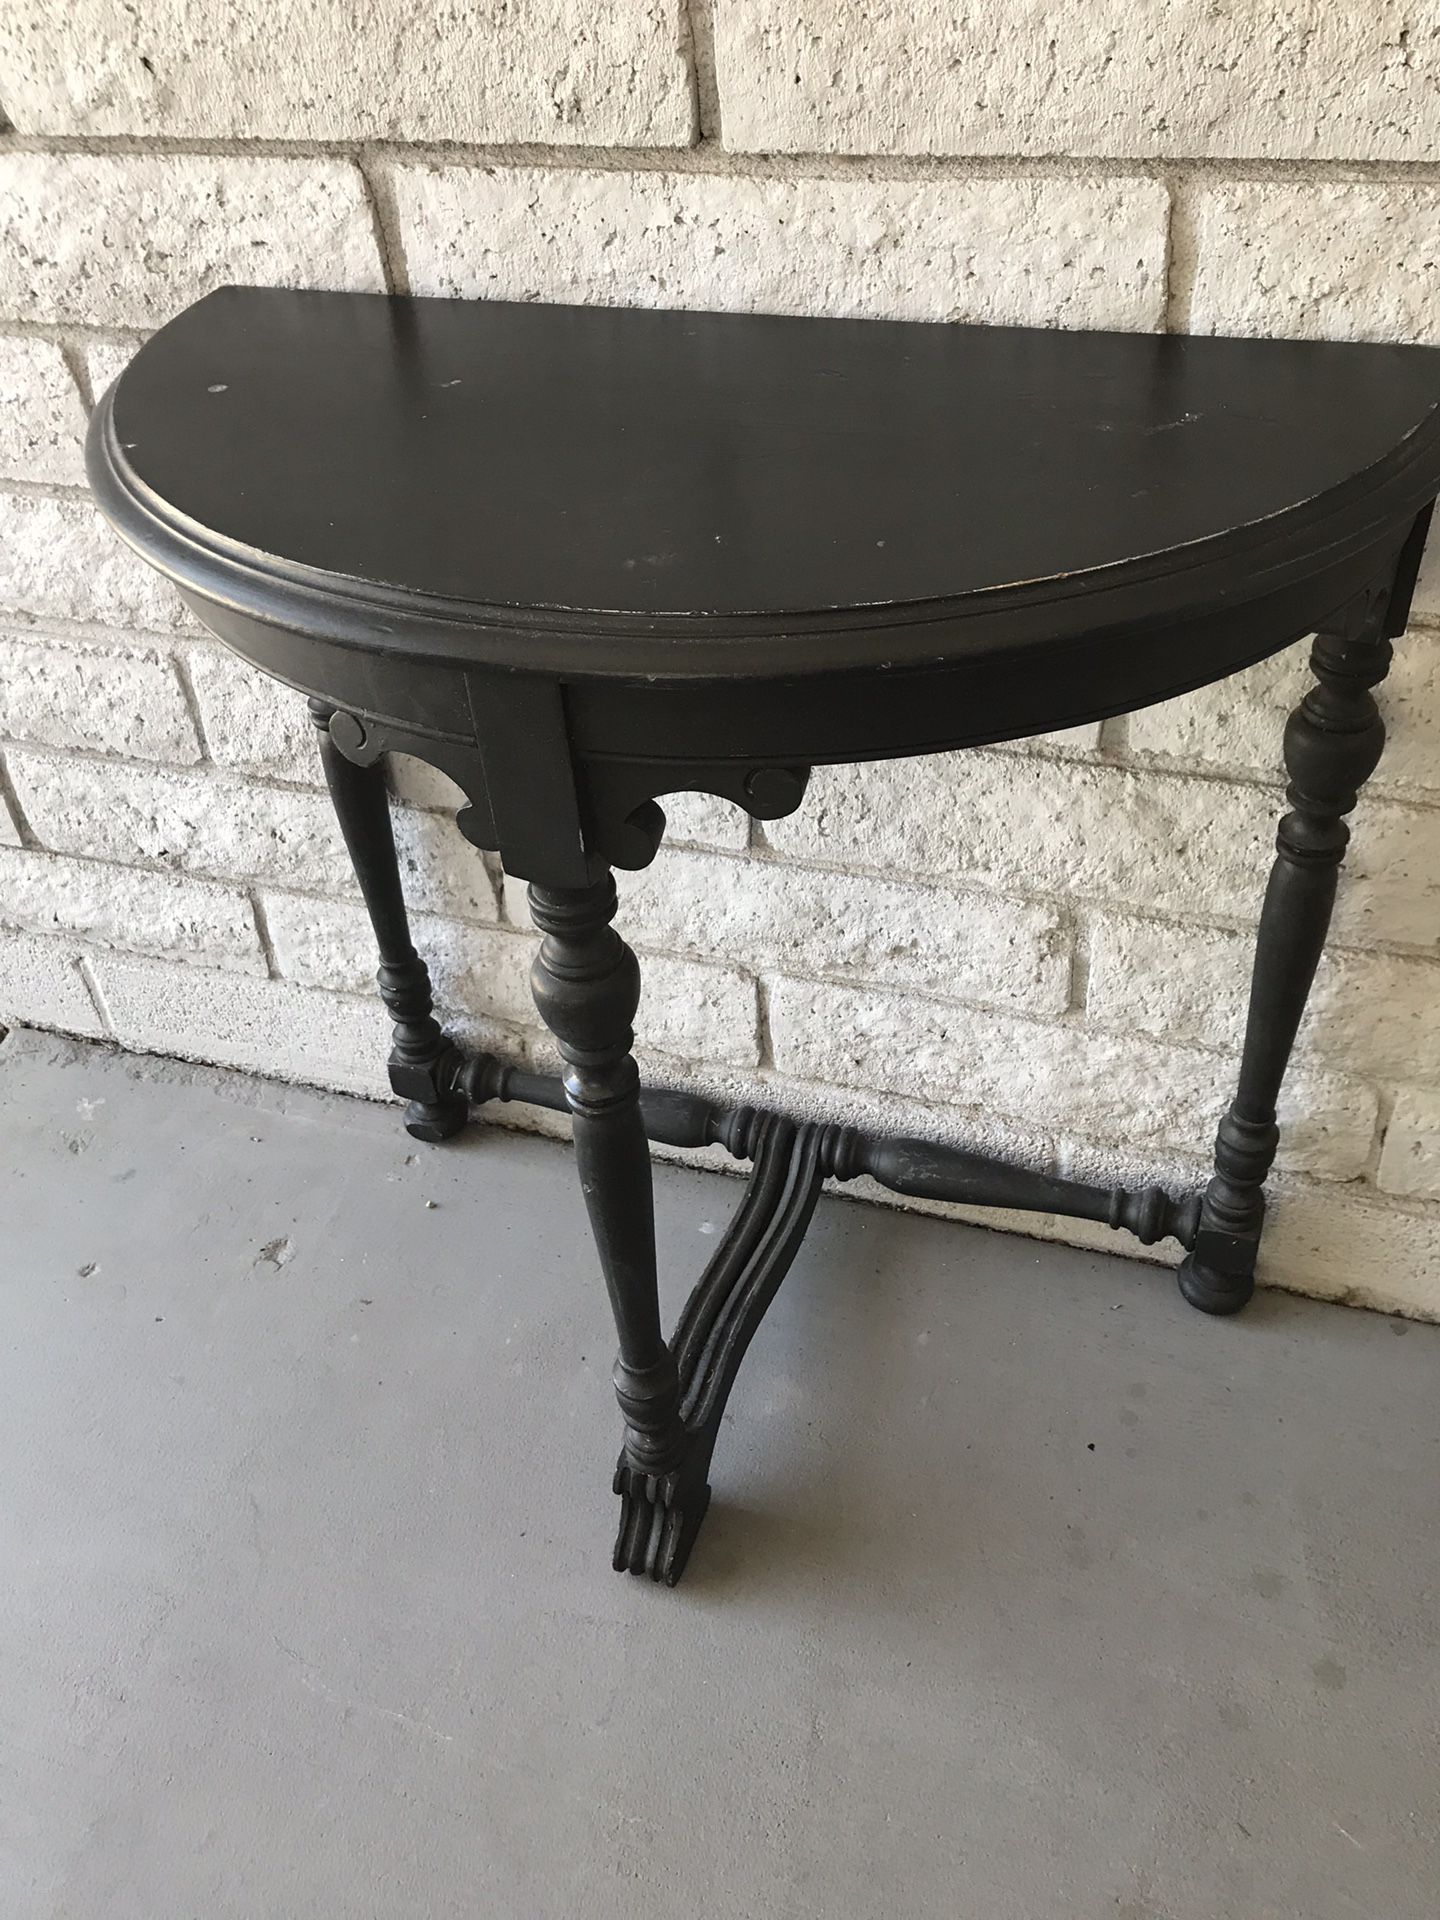 Nice little console black table